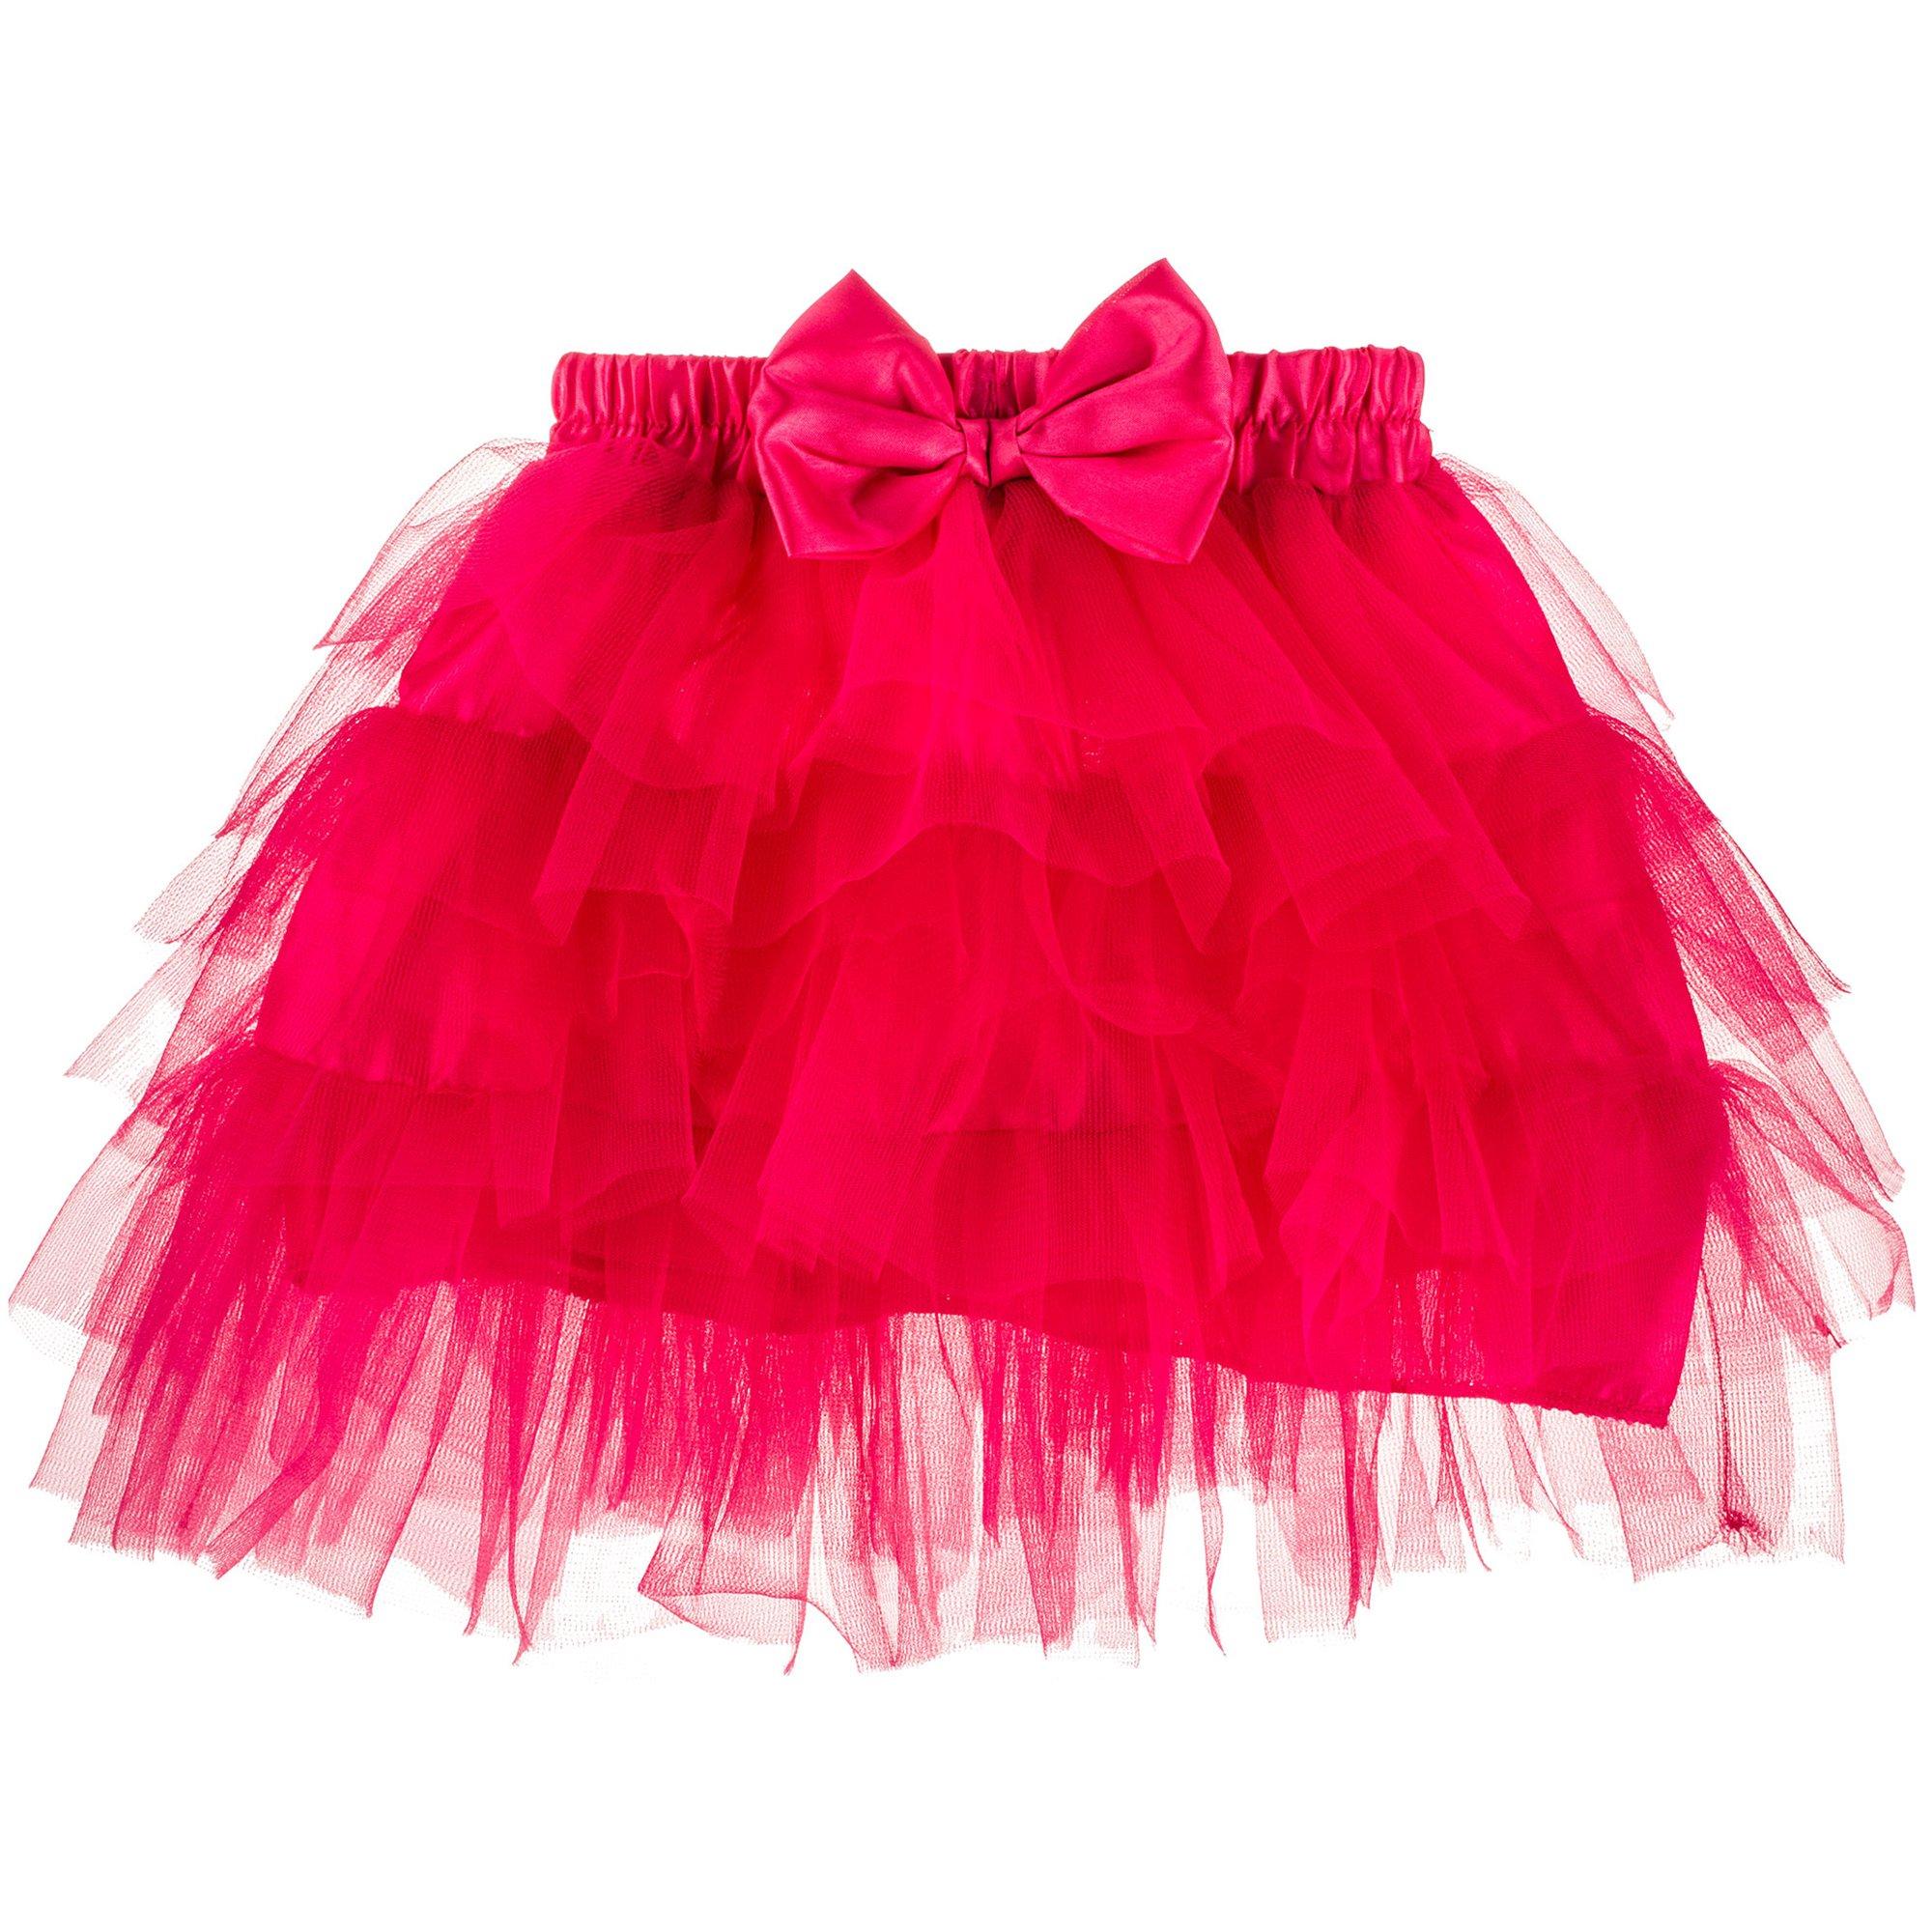 Hot Pink Tutu With Ribbon Trim Tutu, Baby Girl Pink Tulle Skirt for Kids,  Dress for Toddler Girl Outfits for Pictures, NB Size 12 TWSP 